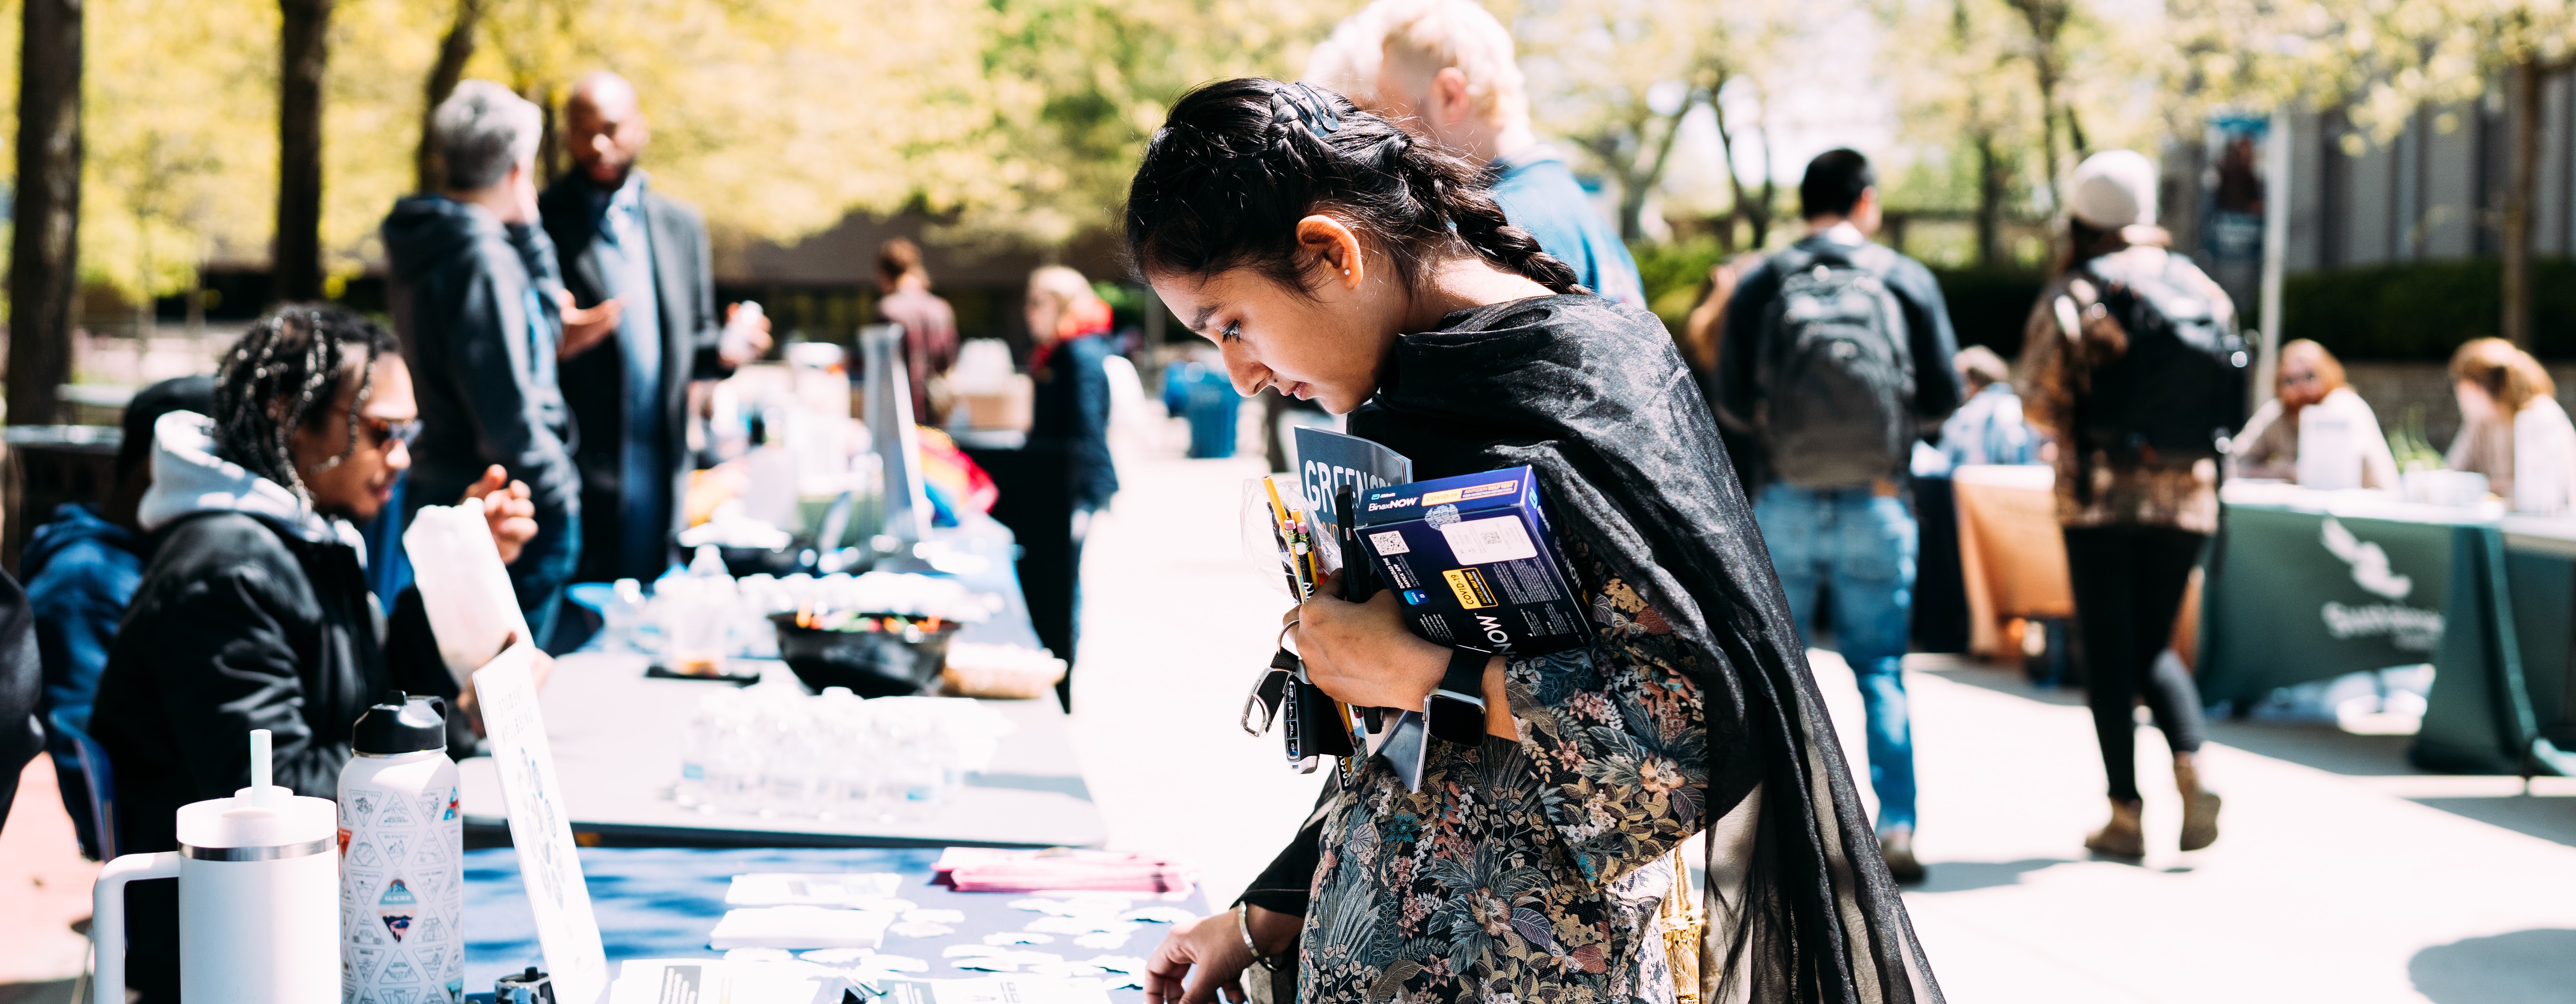 Spring weather ushered in the annual Spring Fling on the Columbus Campus on April 25. Students enjoyed free food and plenty of fun in the courtyard.